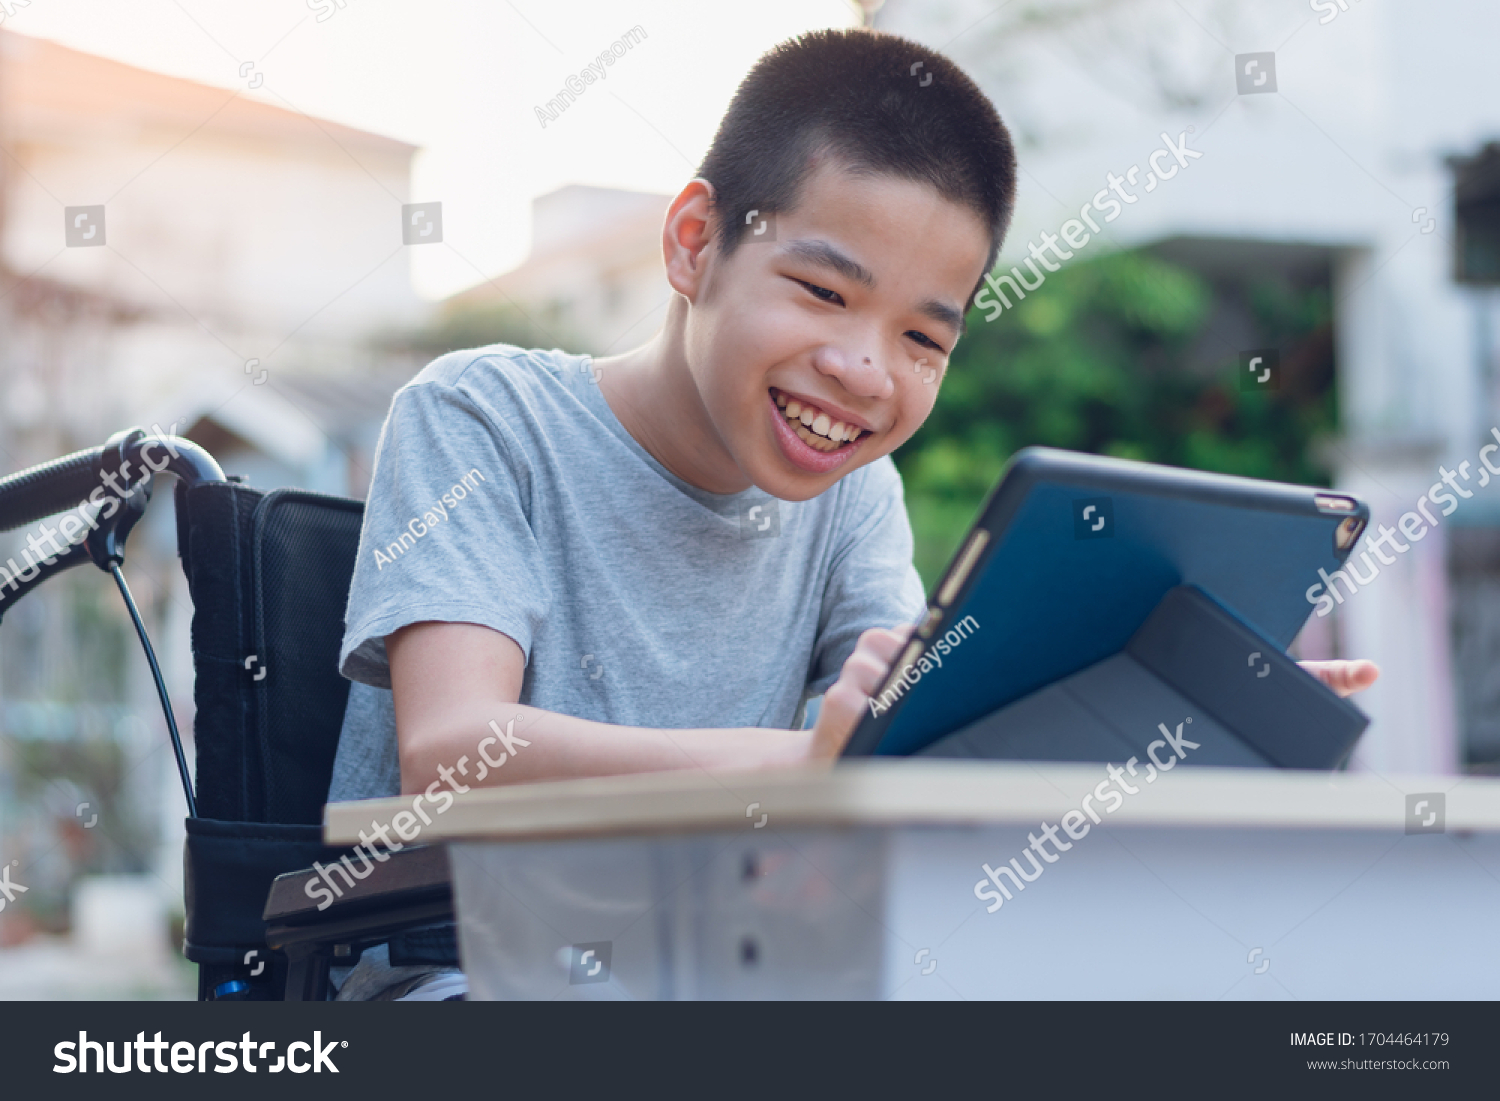 Disabled child on wheelchair happy time to use a tablet in the house, Study and Work at home for safety from covid 19, Life in the education age of special need kid, Happy disability boy concept. #1704464179